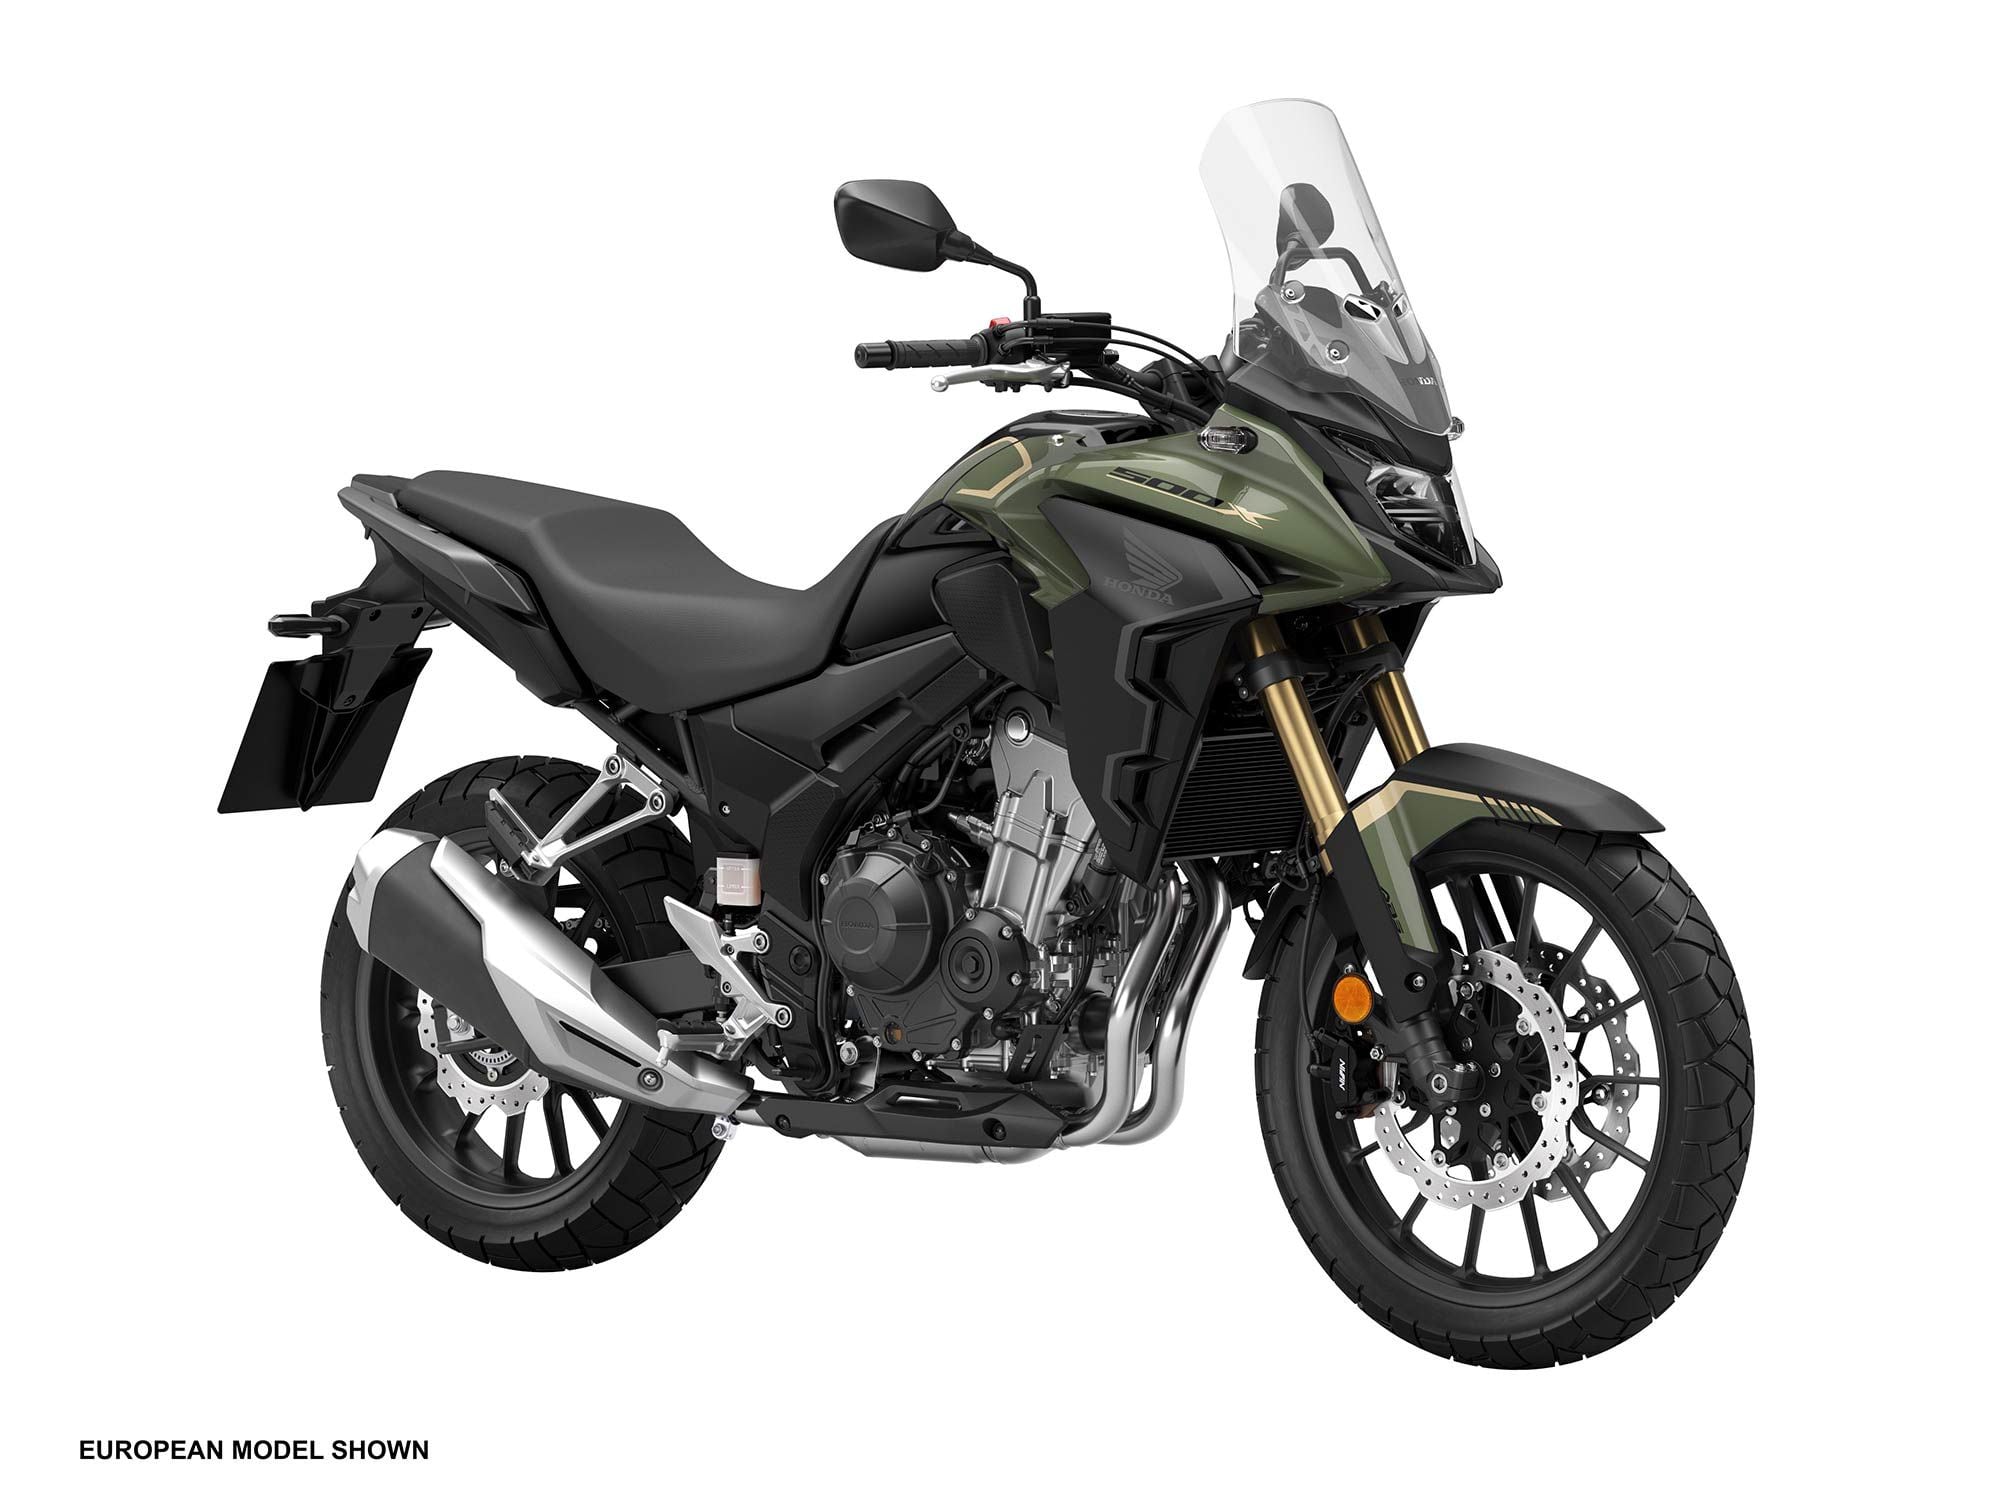 The 2022 Honda CB500X gets upgraded suspension and braking kit.